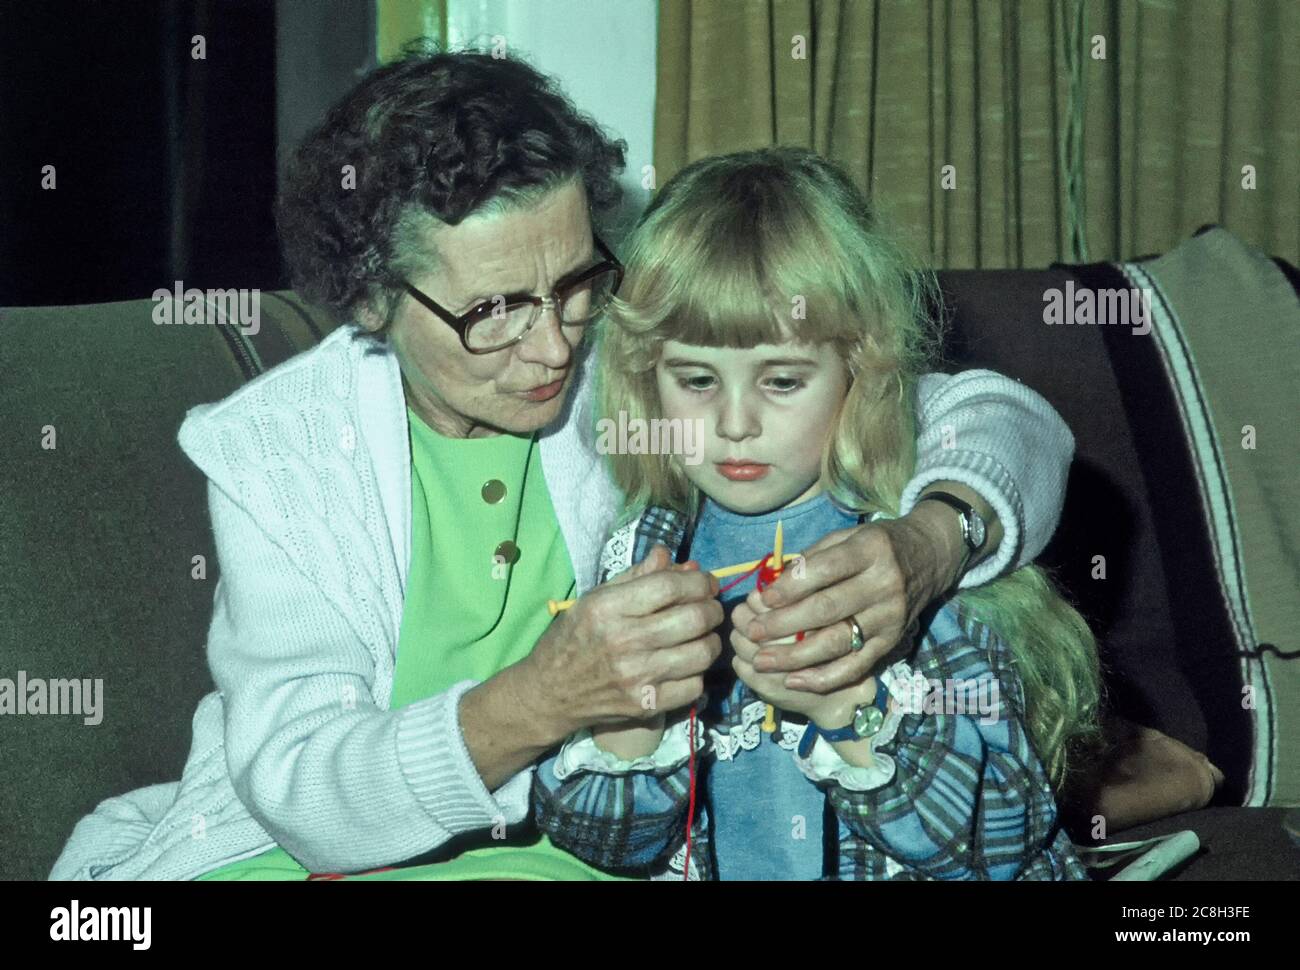 Concentration of young girl child granddaughter & grandmother gets help learning knitting  from old senior mature granny grandparents home indoors UK Stock Photo